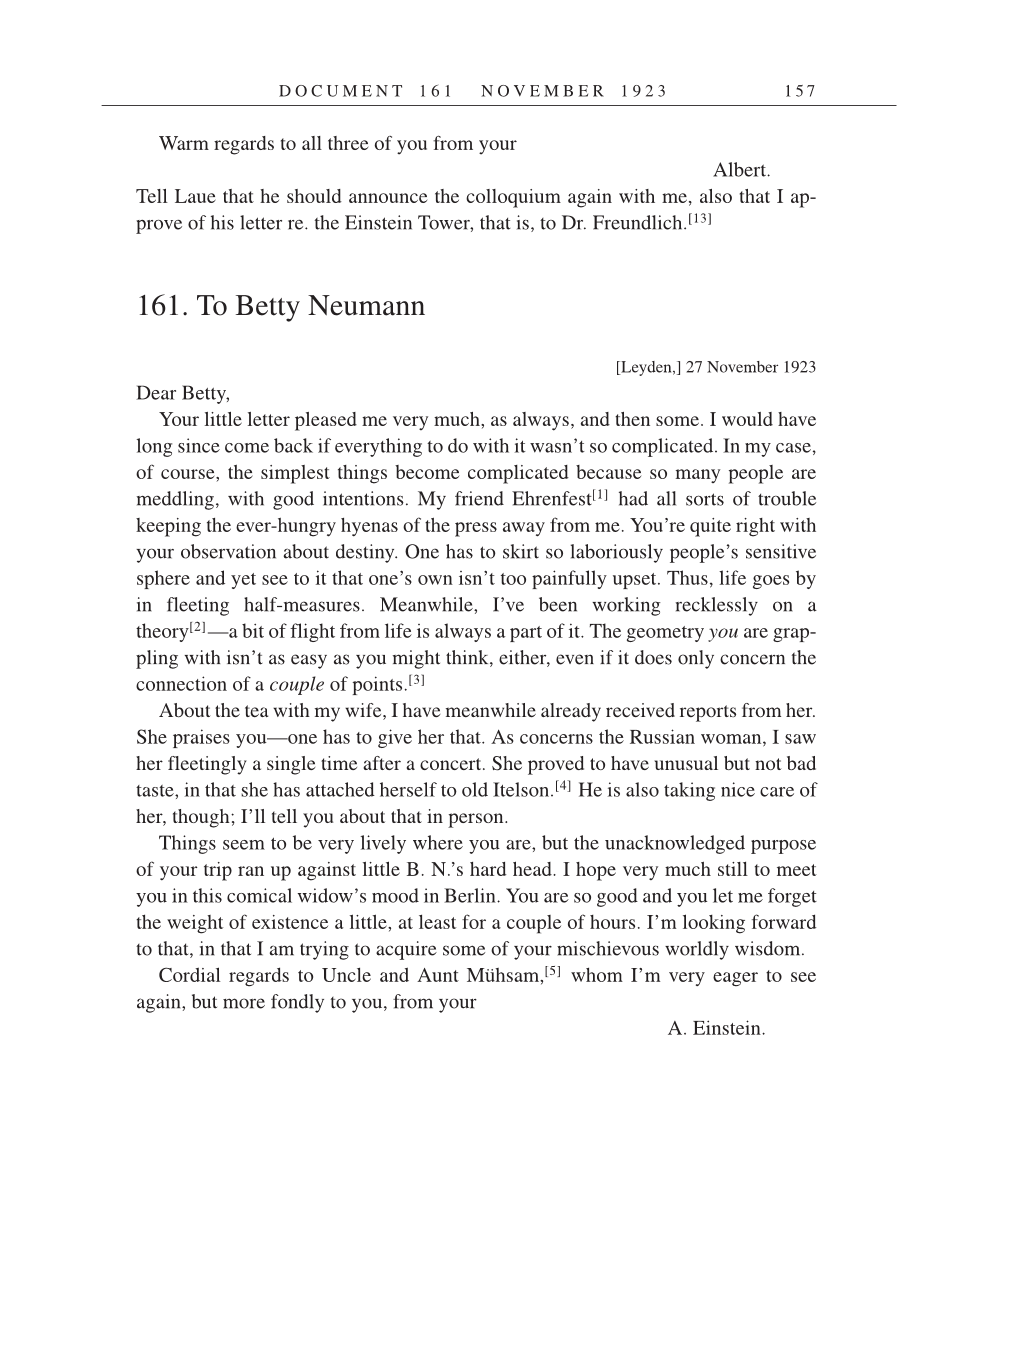 Volume 14: The Berlin Years: Writings & Correspondence, April 1923-May 1925 (English Translation Supplement) page 157